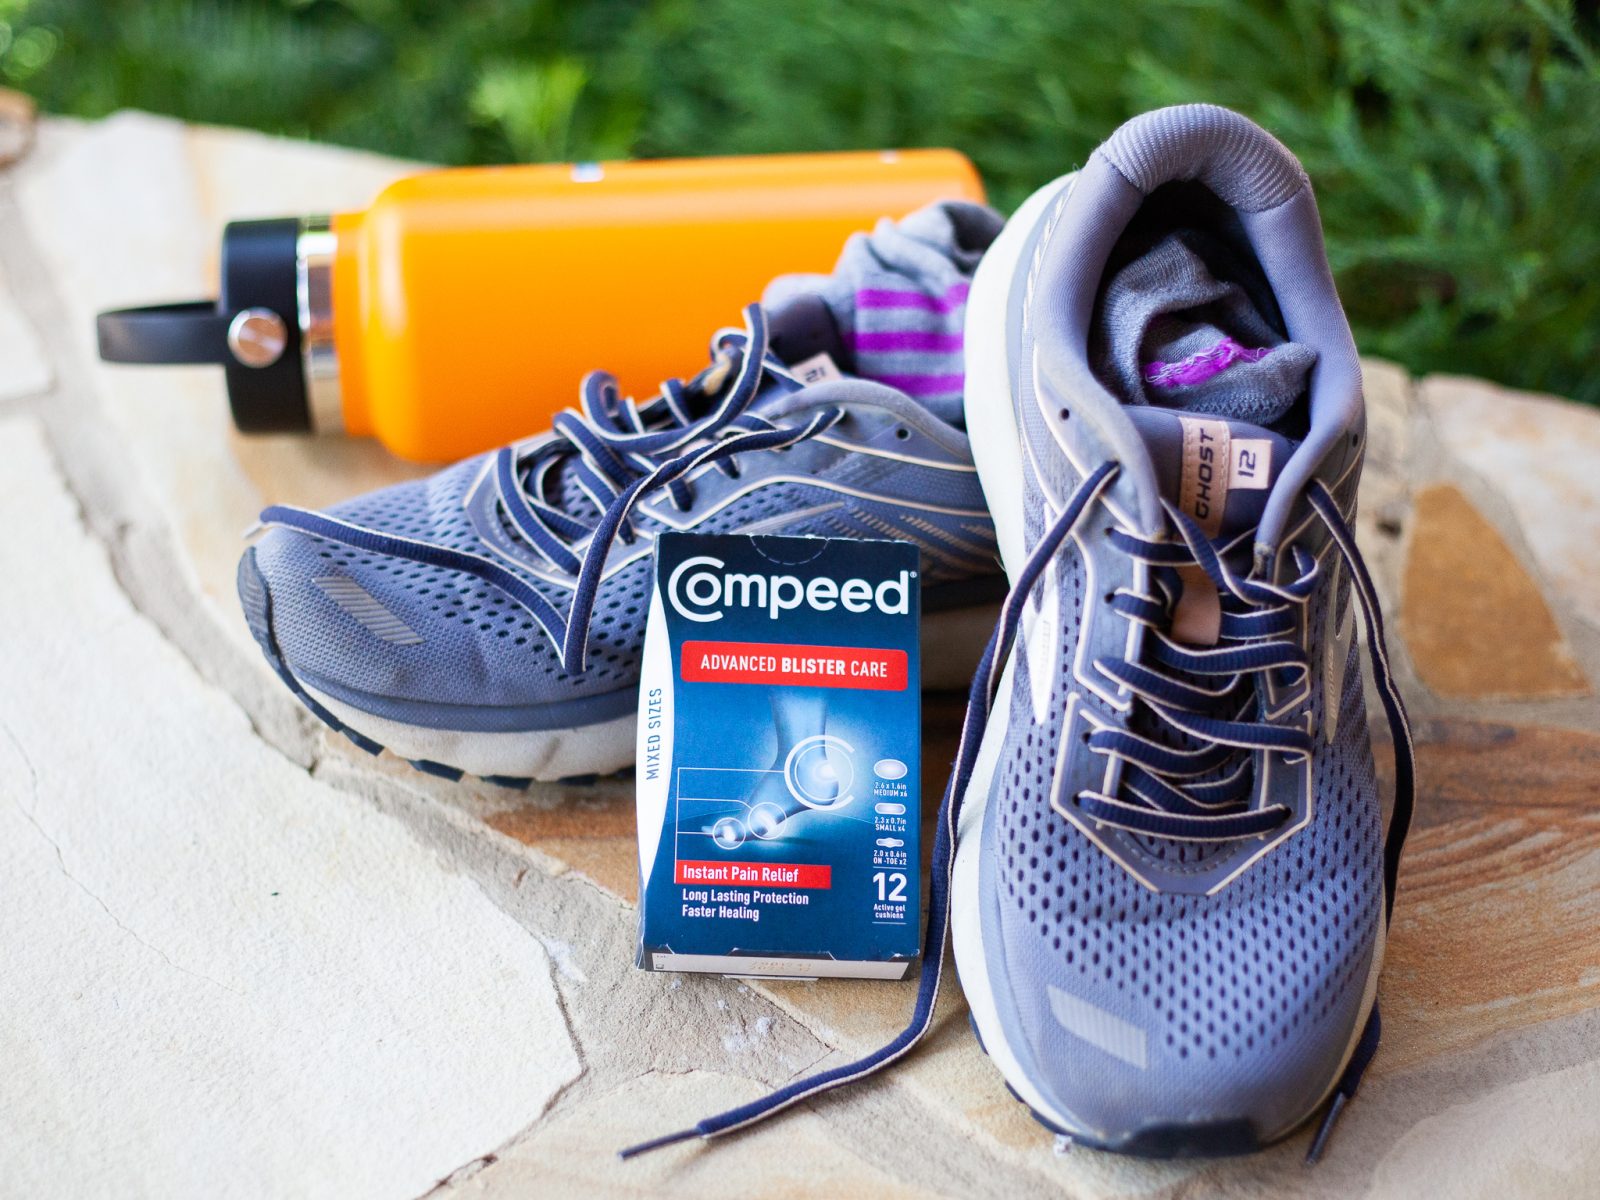 Compeed Advanced Blister Care FREE With New Coupon & Cash Back At Publix